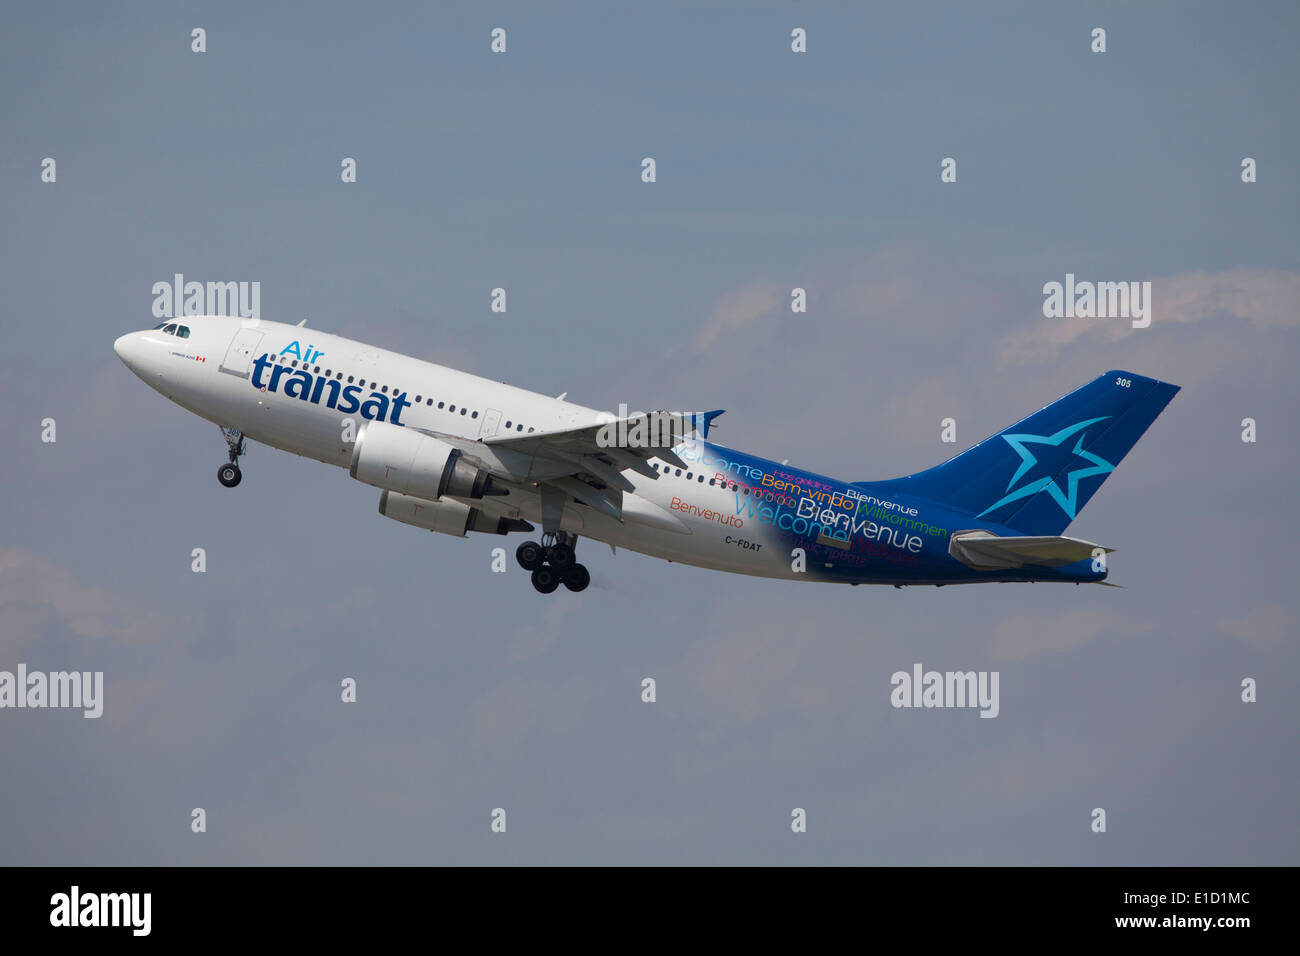 Air Transat, Canadian airline Airbus A310-300 taking off Stock Photo